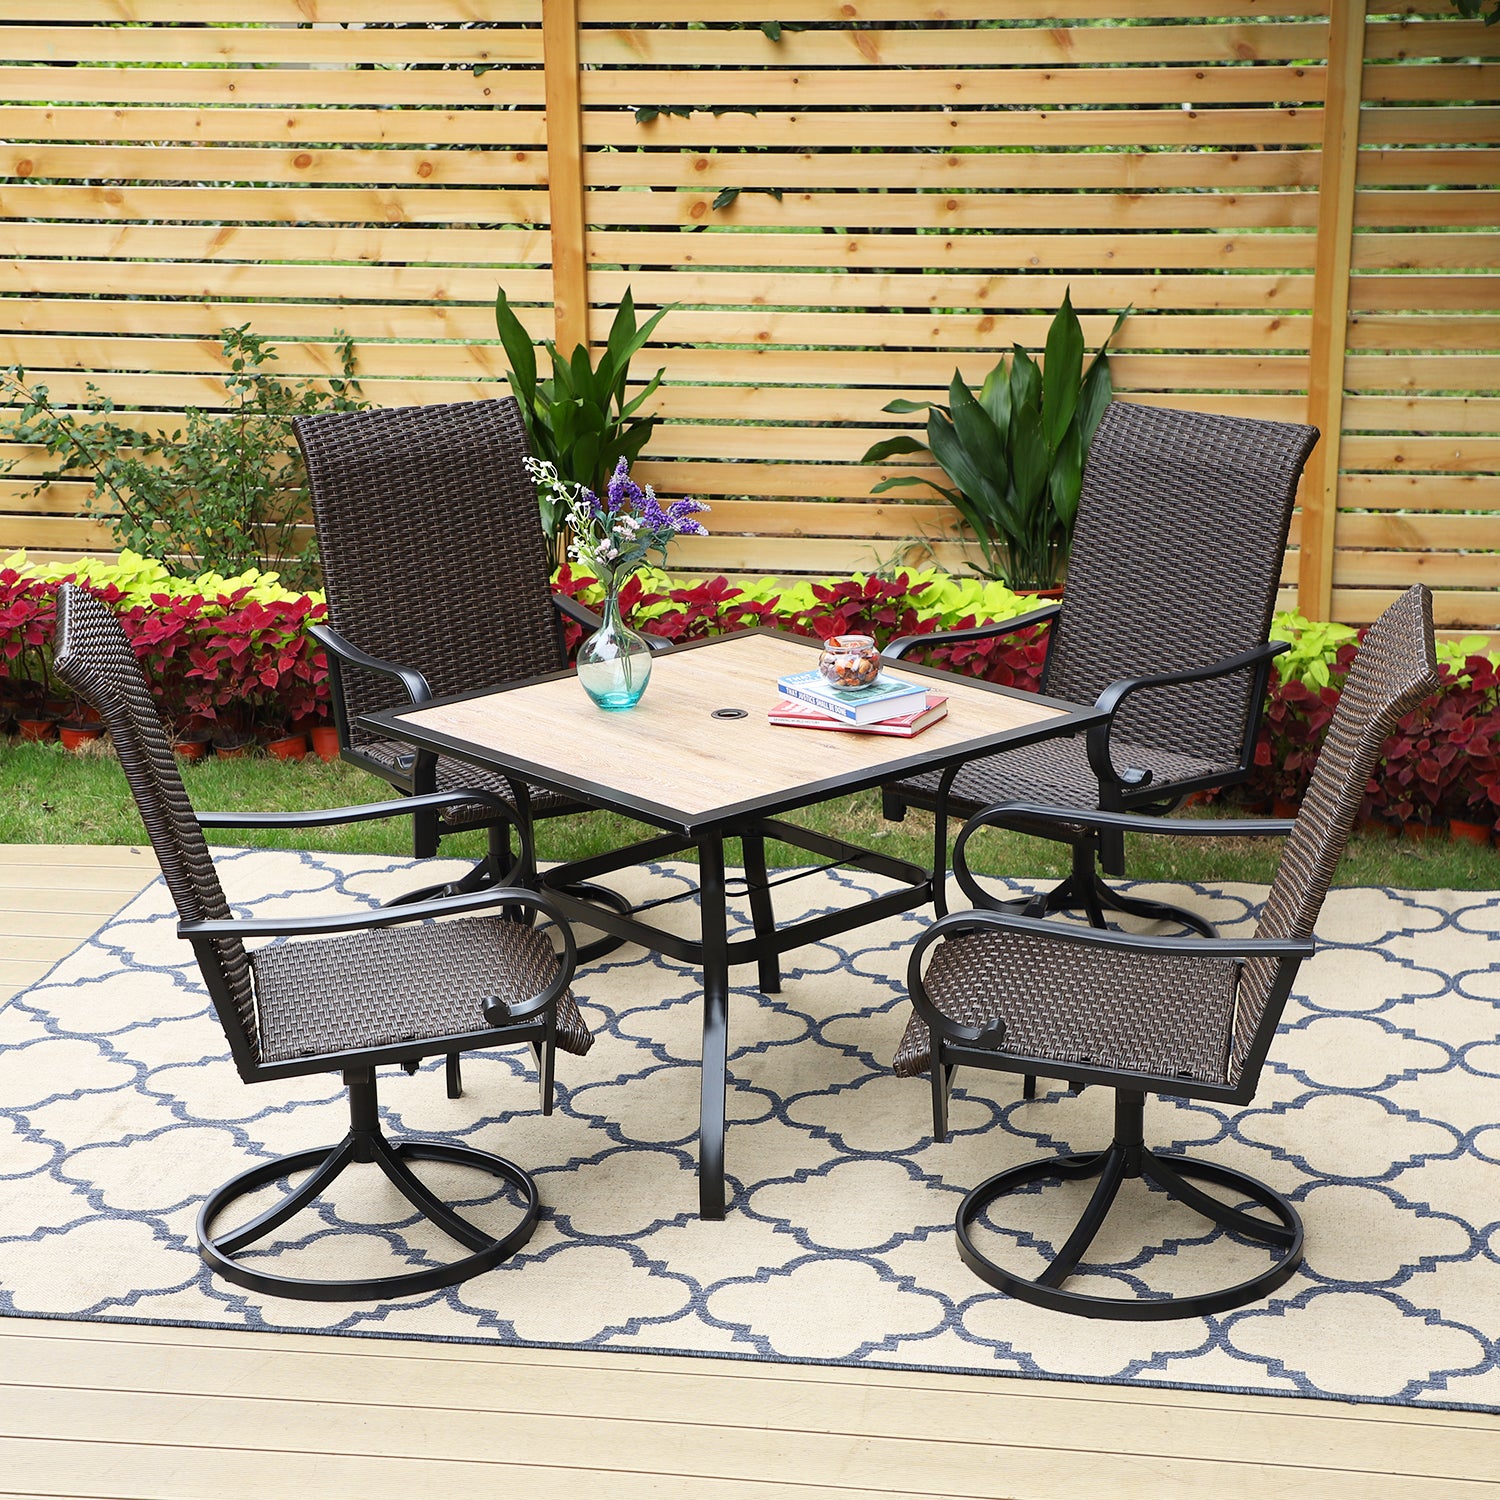 PHI VILLA Wood-Look Square Table & 4 Rattan Swivel Chairs 5-Piece Outdoor Dining Set